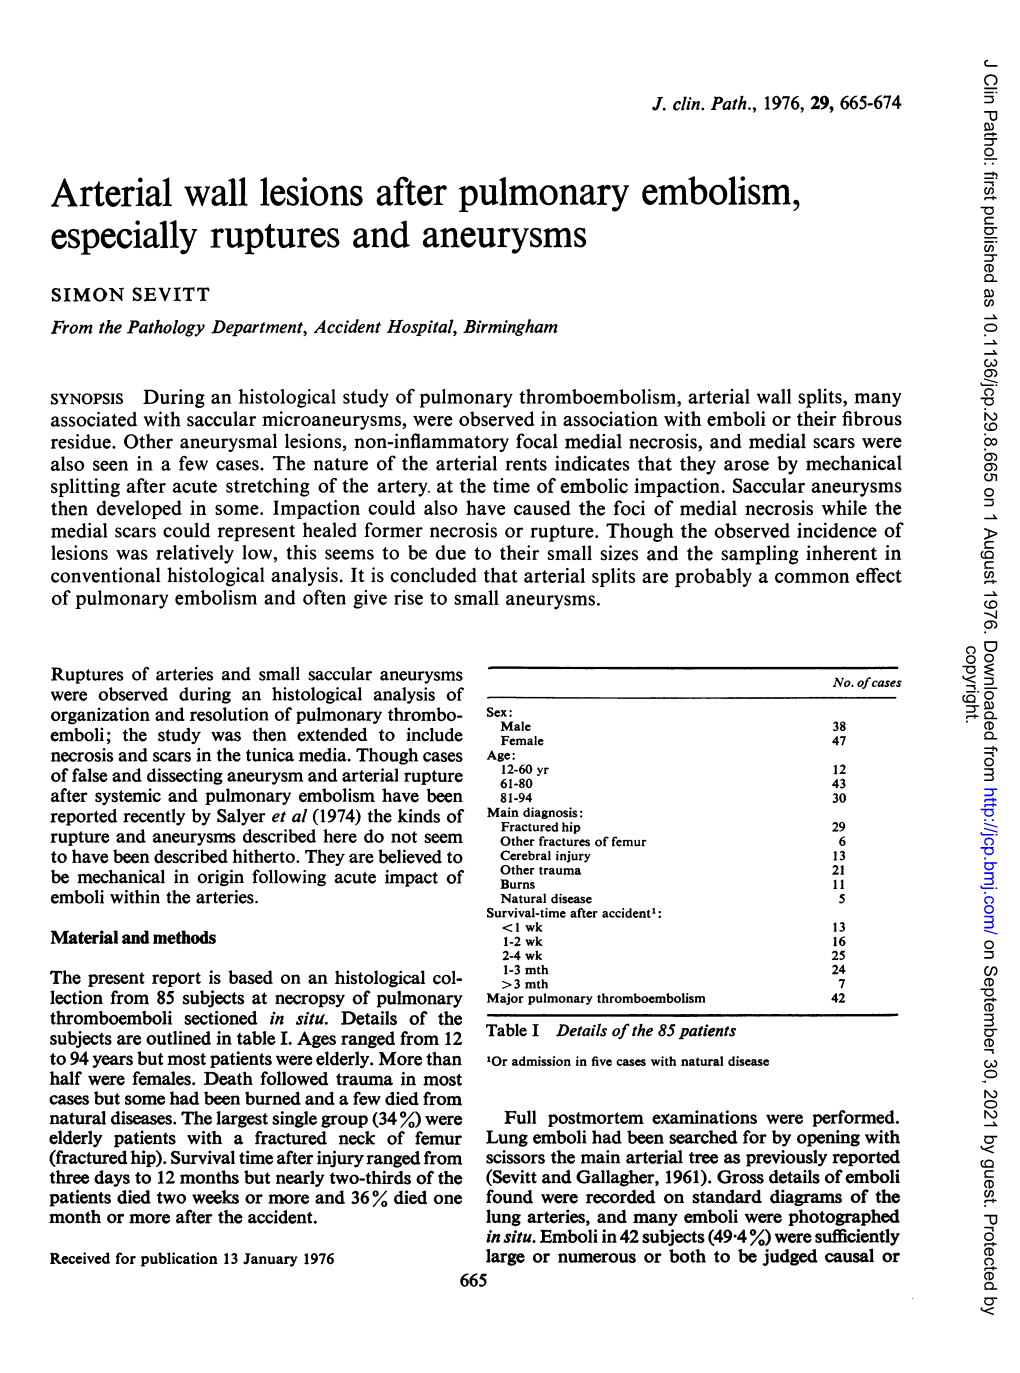 Arterial Wall Lesions After Pulmonary Embolism, Especially Ruptures and Aneurysms